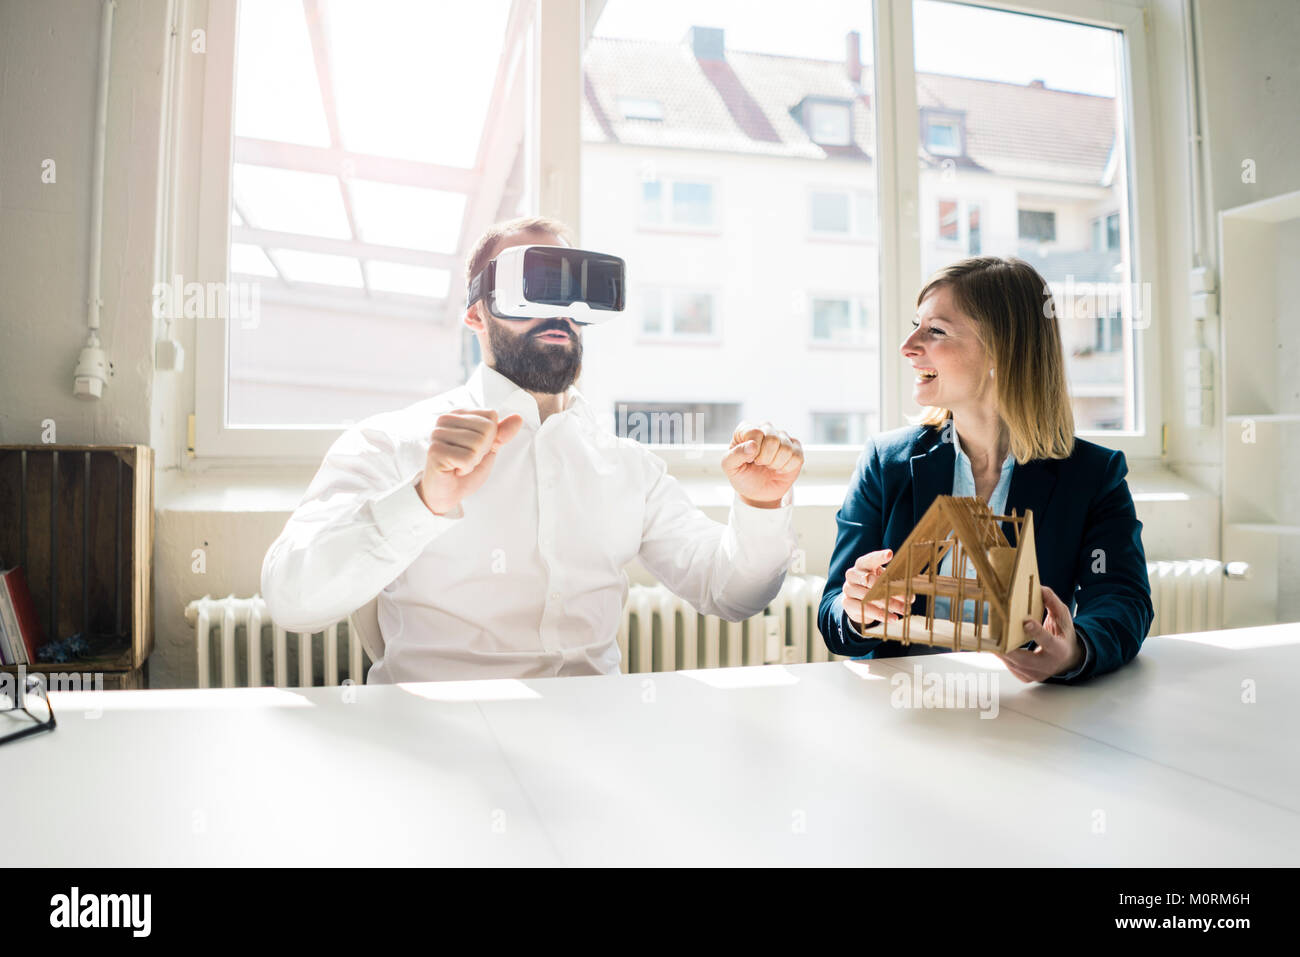 Woman and man with house model and VR glasses in office Stock Photo